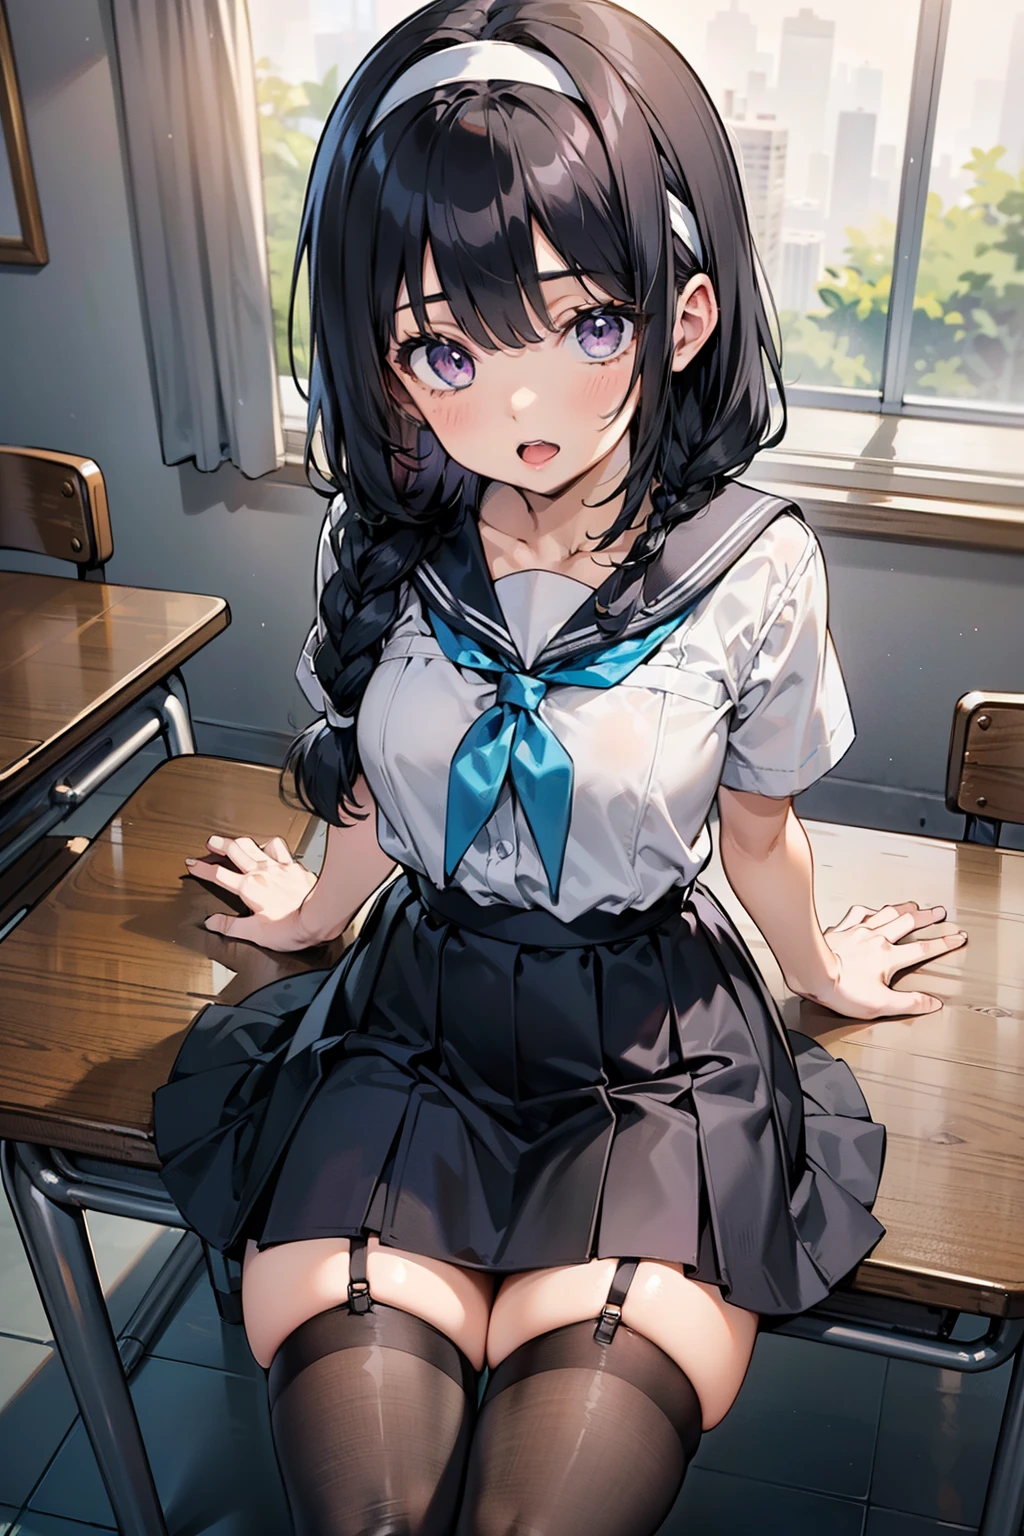 body 8 times longer than head, (Highly detailed CG unity 8k), (highest quality)，(very detailed)，(ultra high resolution), black hair, High school girl wearing a navy sailor suit, Anime 2D rendering, realistic young anime high school girl, ((White headband)), purple eyes, small breasts, tall, slanted eyes, (school scenery), black stockings, bright color, open your mouth, Dark blue skirt,  braid hair, Bangs Patsun, position looking down from above, sitting on chair in classroom, I fell asleep lying on my desk., 